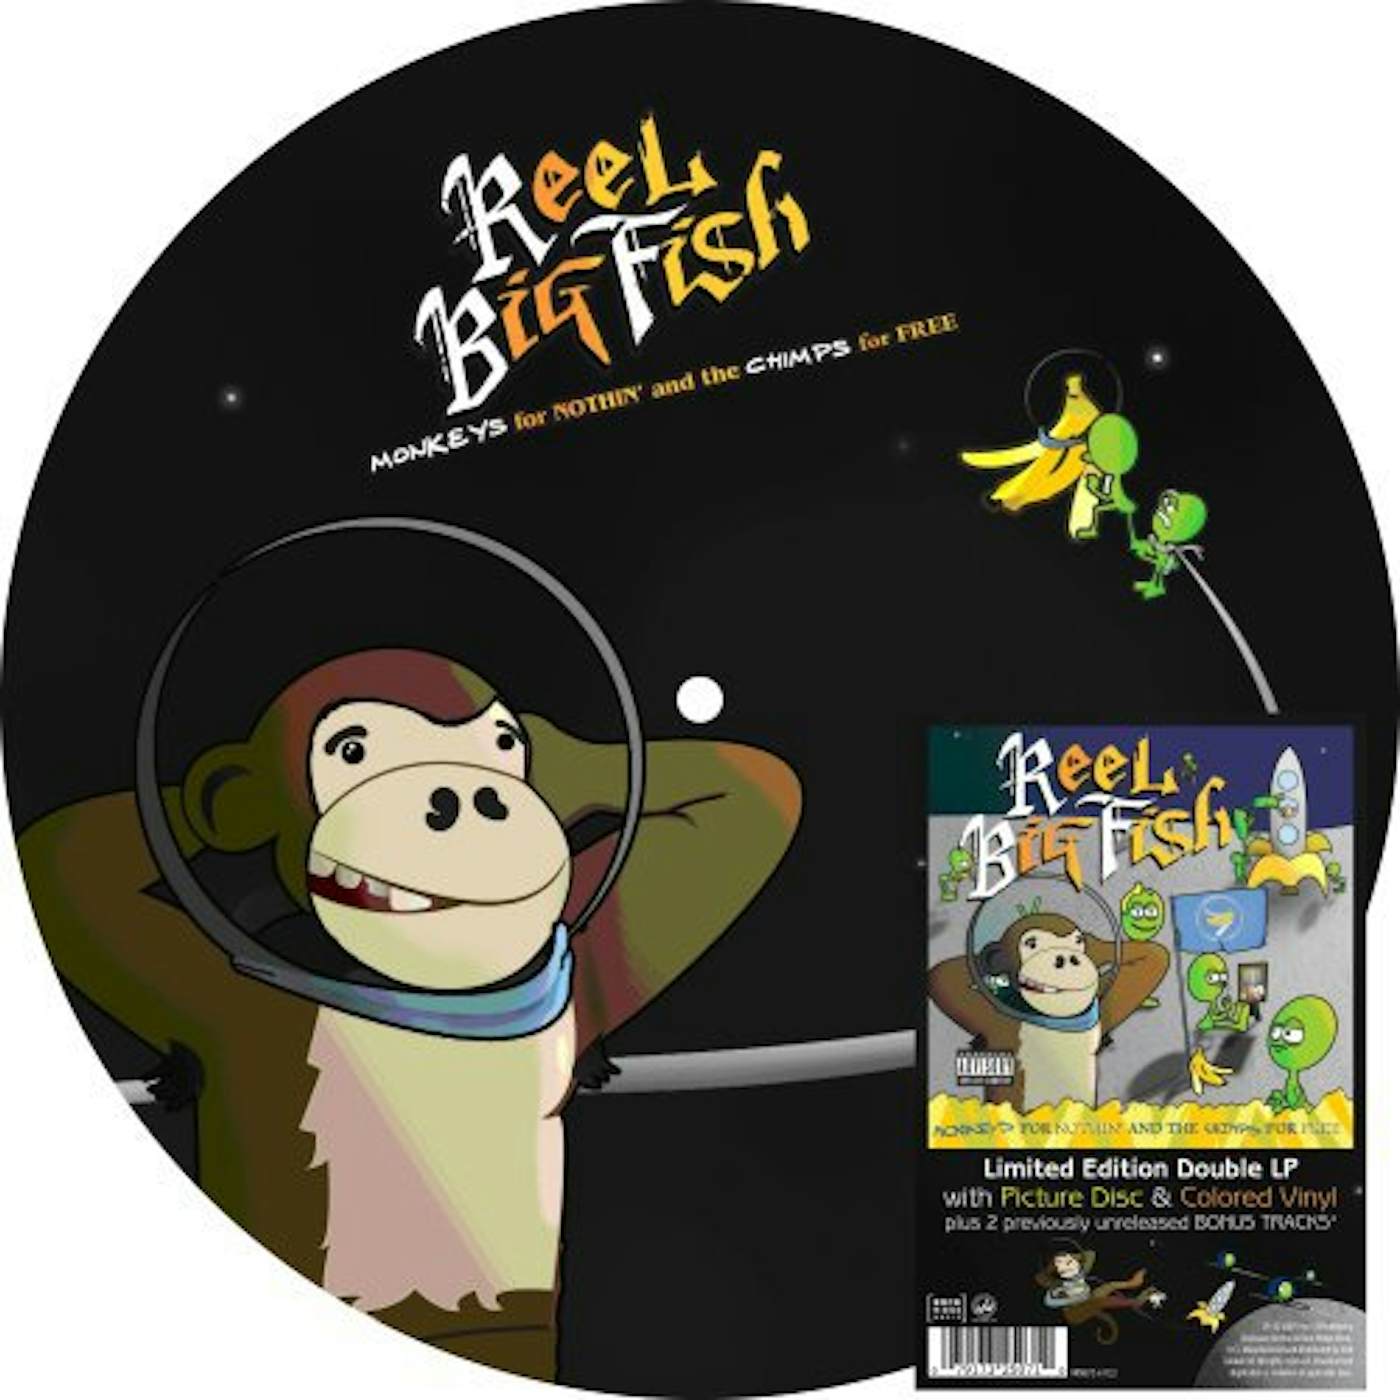 Reel Big Fish - Why Do They Rock So Hard?, Colored Vinyl